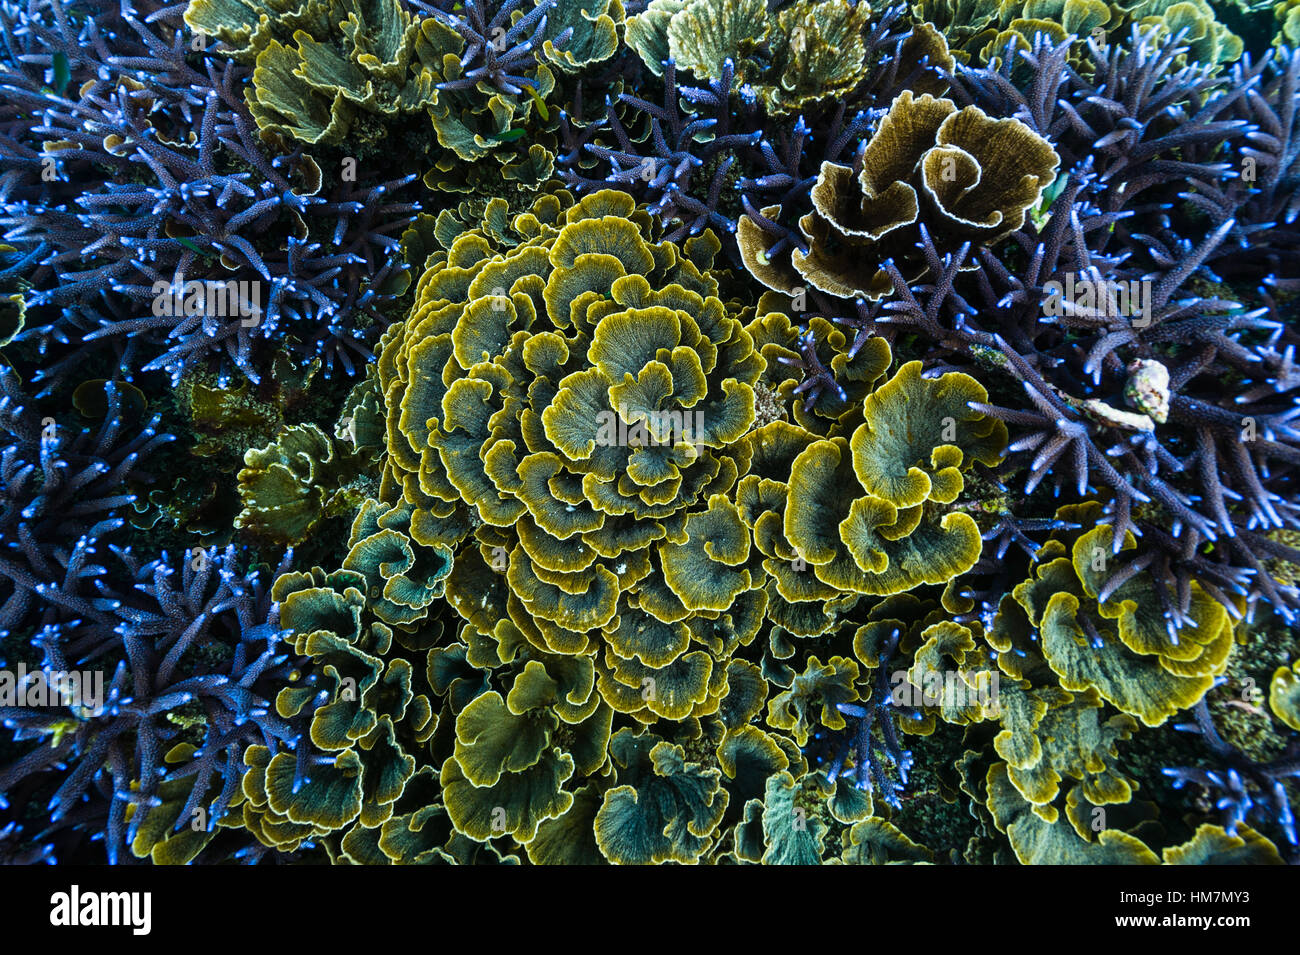 Looking down on a colony of green Vase Corals surrounded by purple Staghorn Coral. Stock Photo